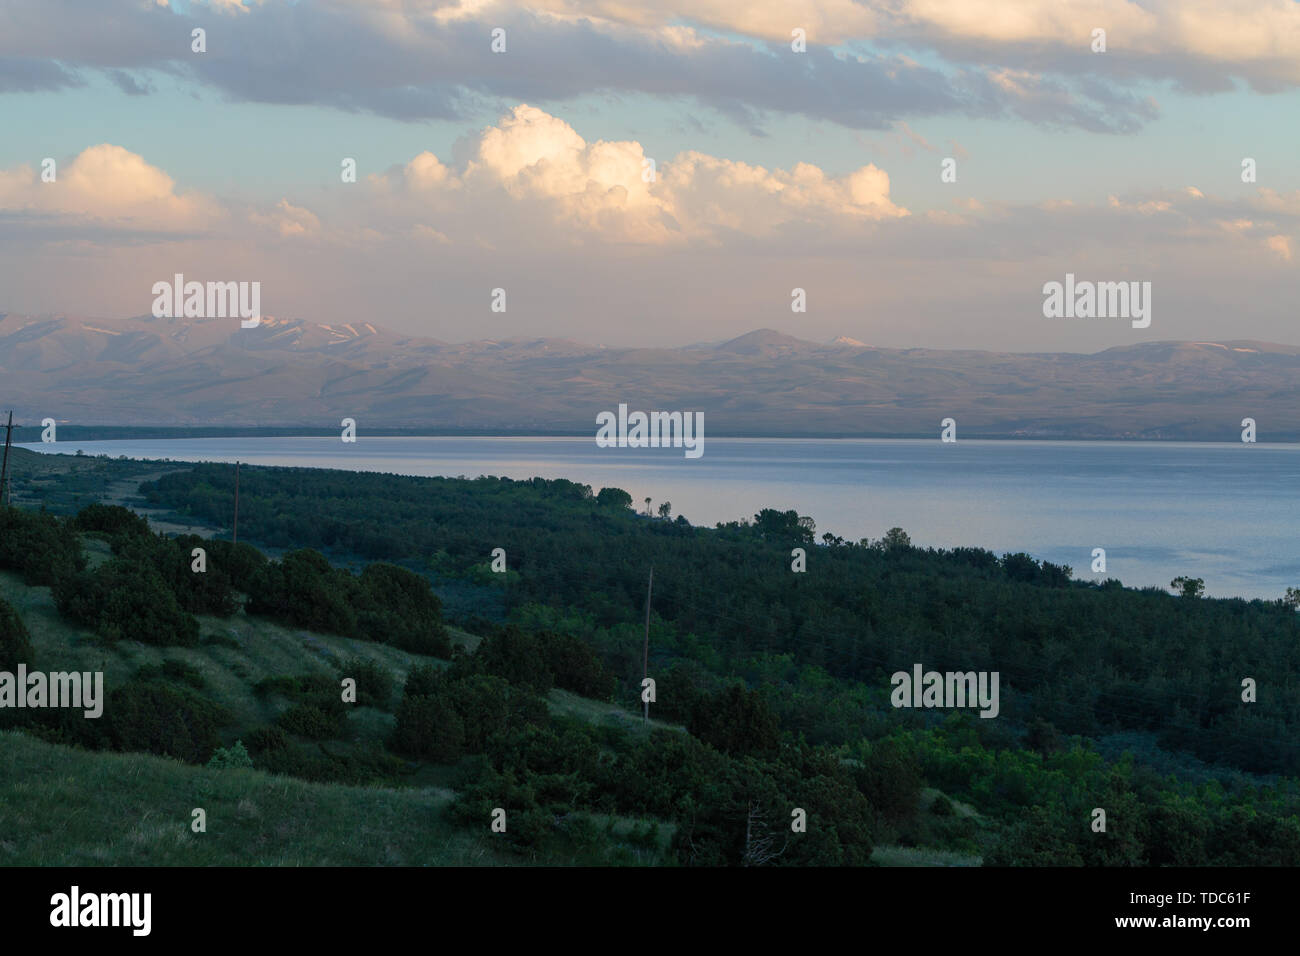 evening landscape of hills with trees and sea in the background of mountains and white clouds Stock Photo